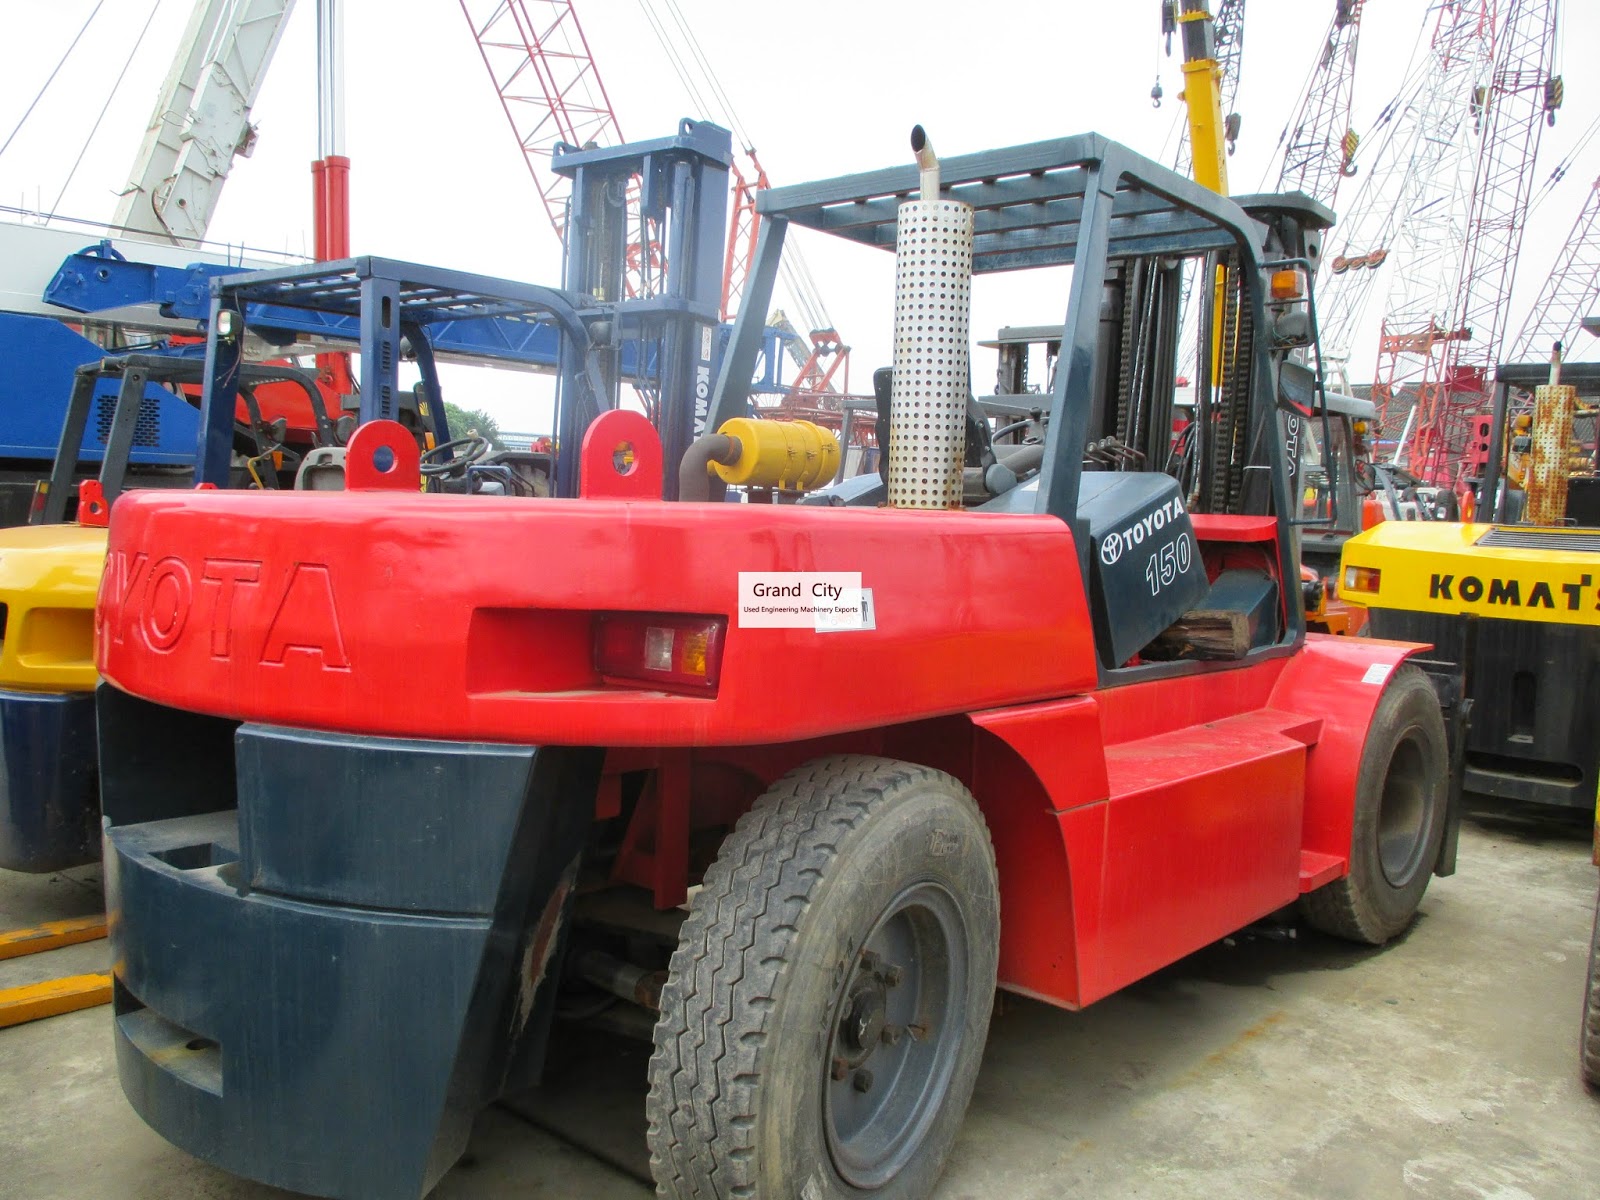 Grand City Engineering Machinery Co Ltd Toyota Forklift 15 Ton For Sale Heavy Forklift For Sale